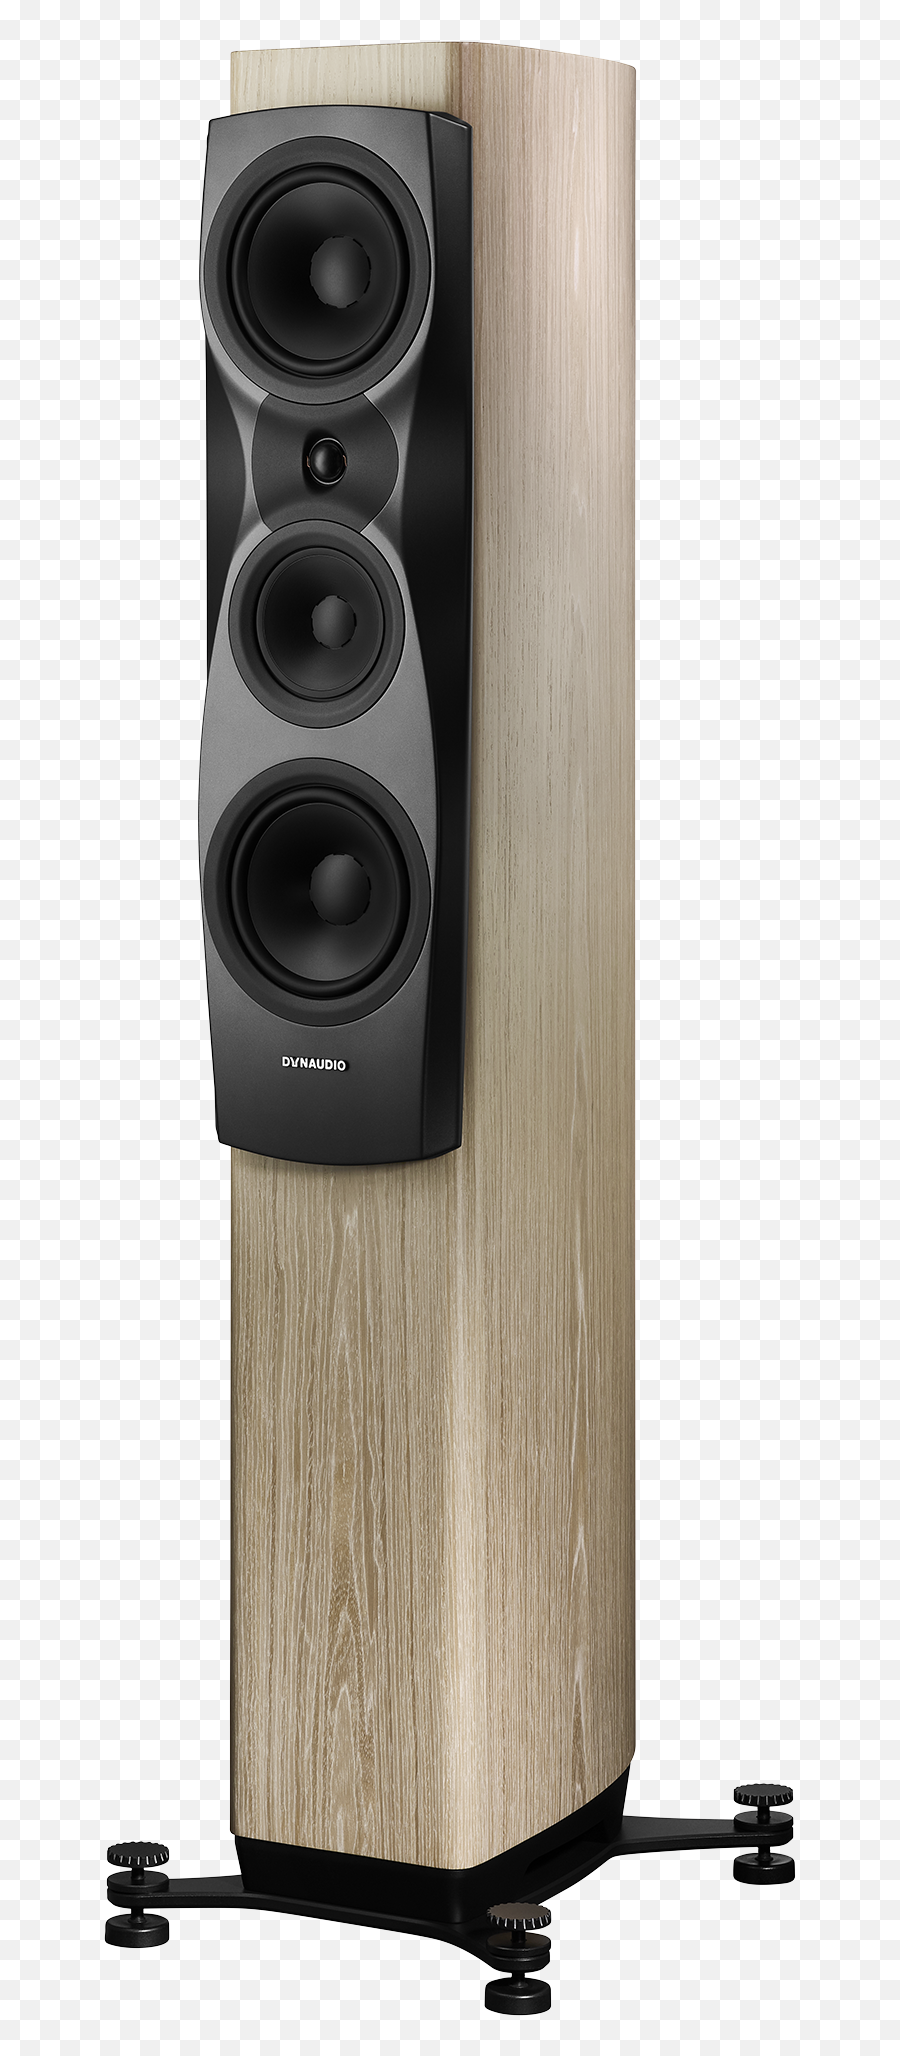 Confidence 30 - Meet Our Smallest Floor Standing Speaker Dynaudio Confidence 30 Png,Klipsch Icon Series Vf35